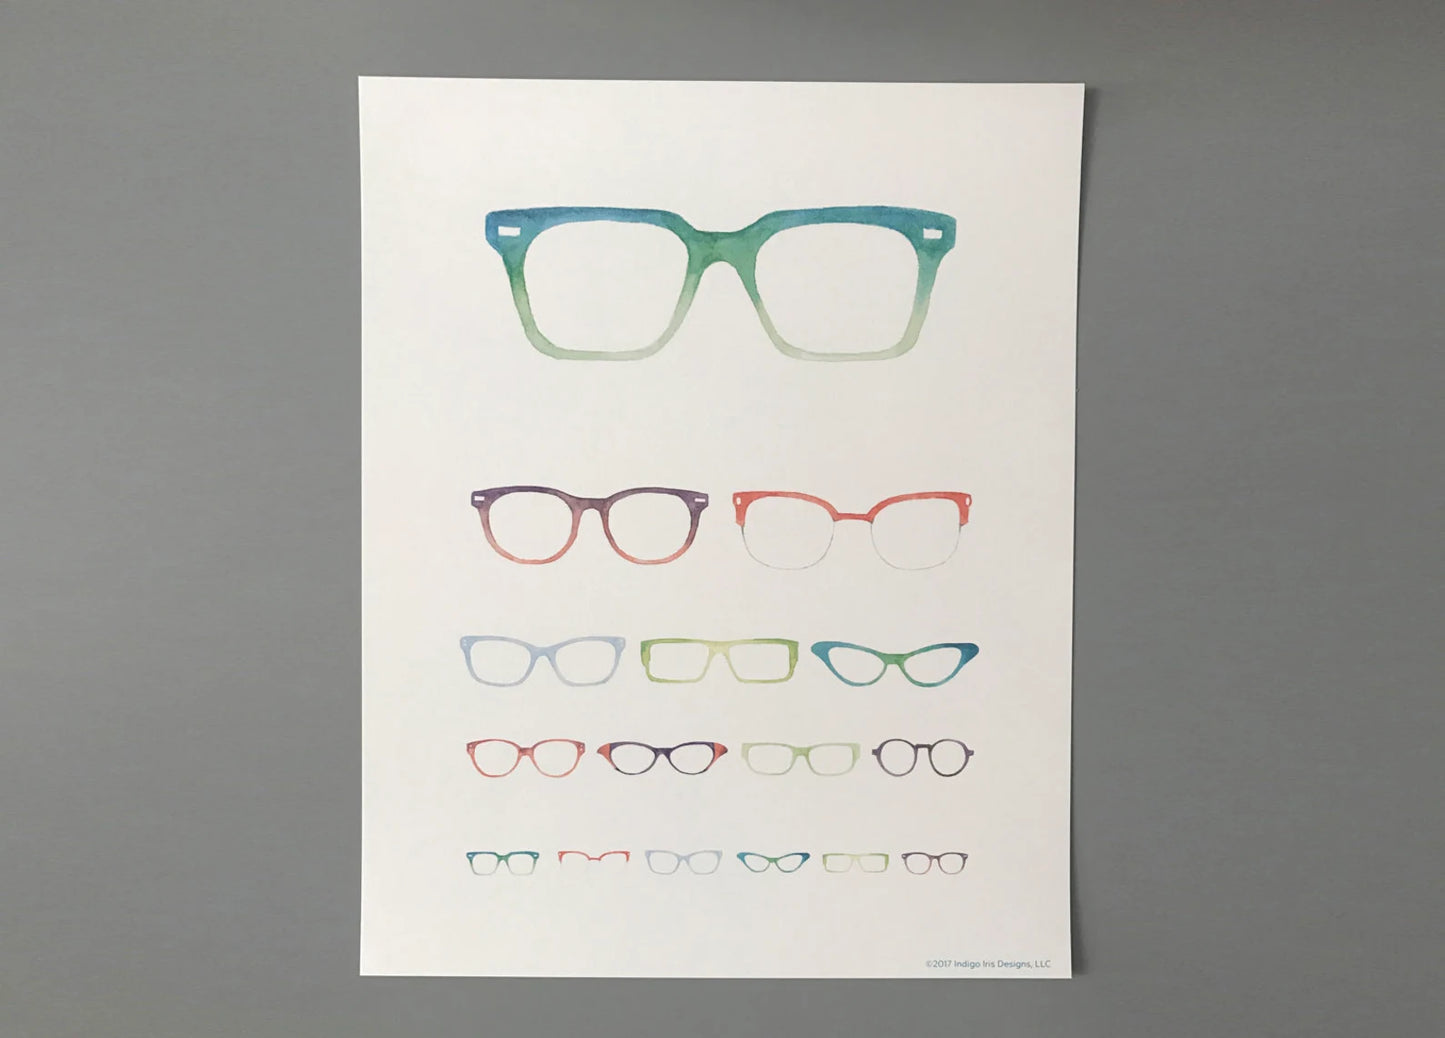 A print of an eye chart made up of varying sizes and styles of glasses. 